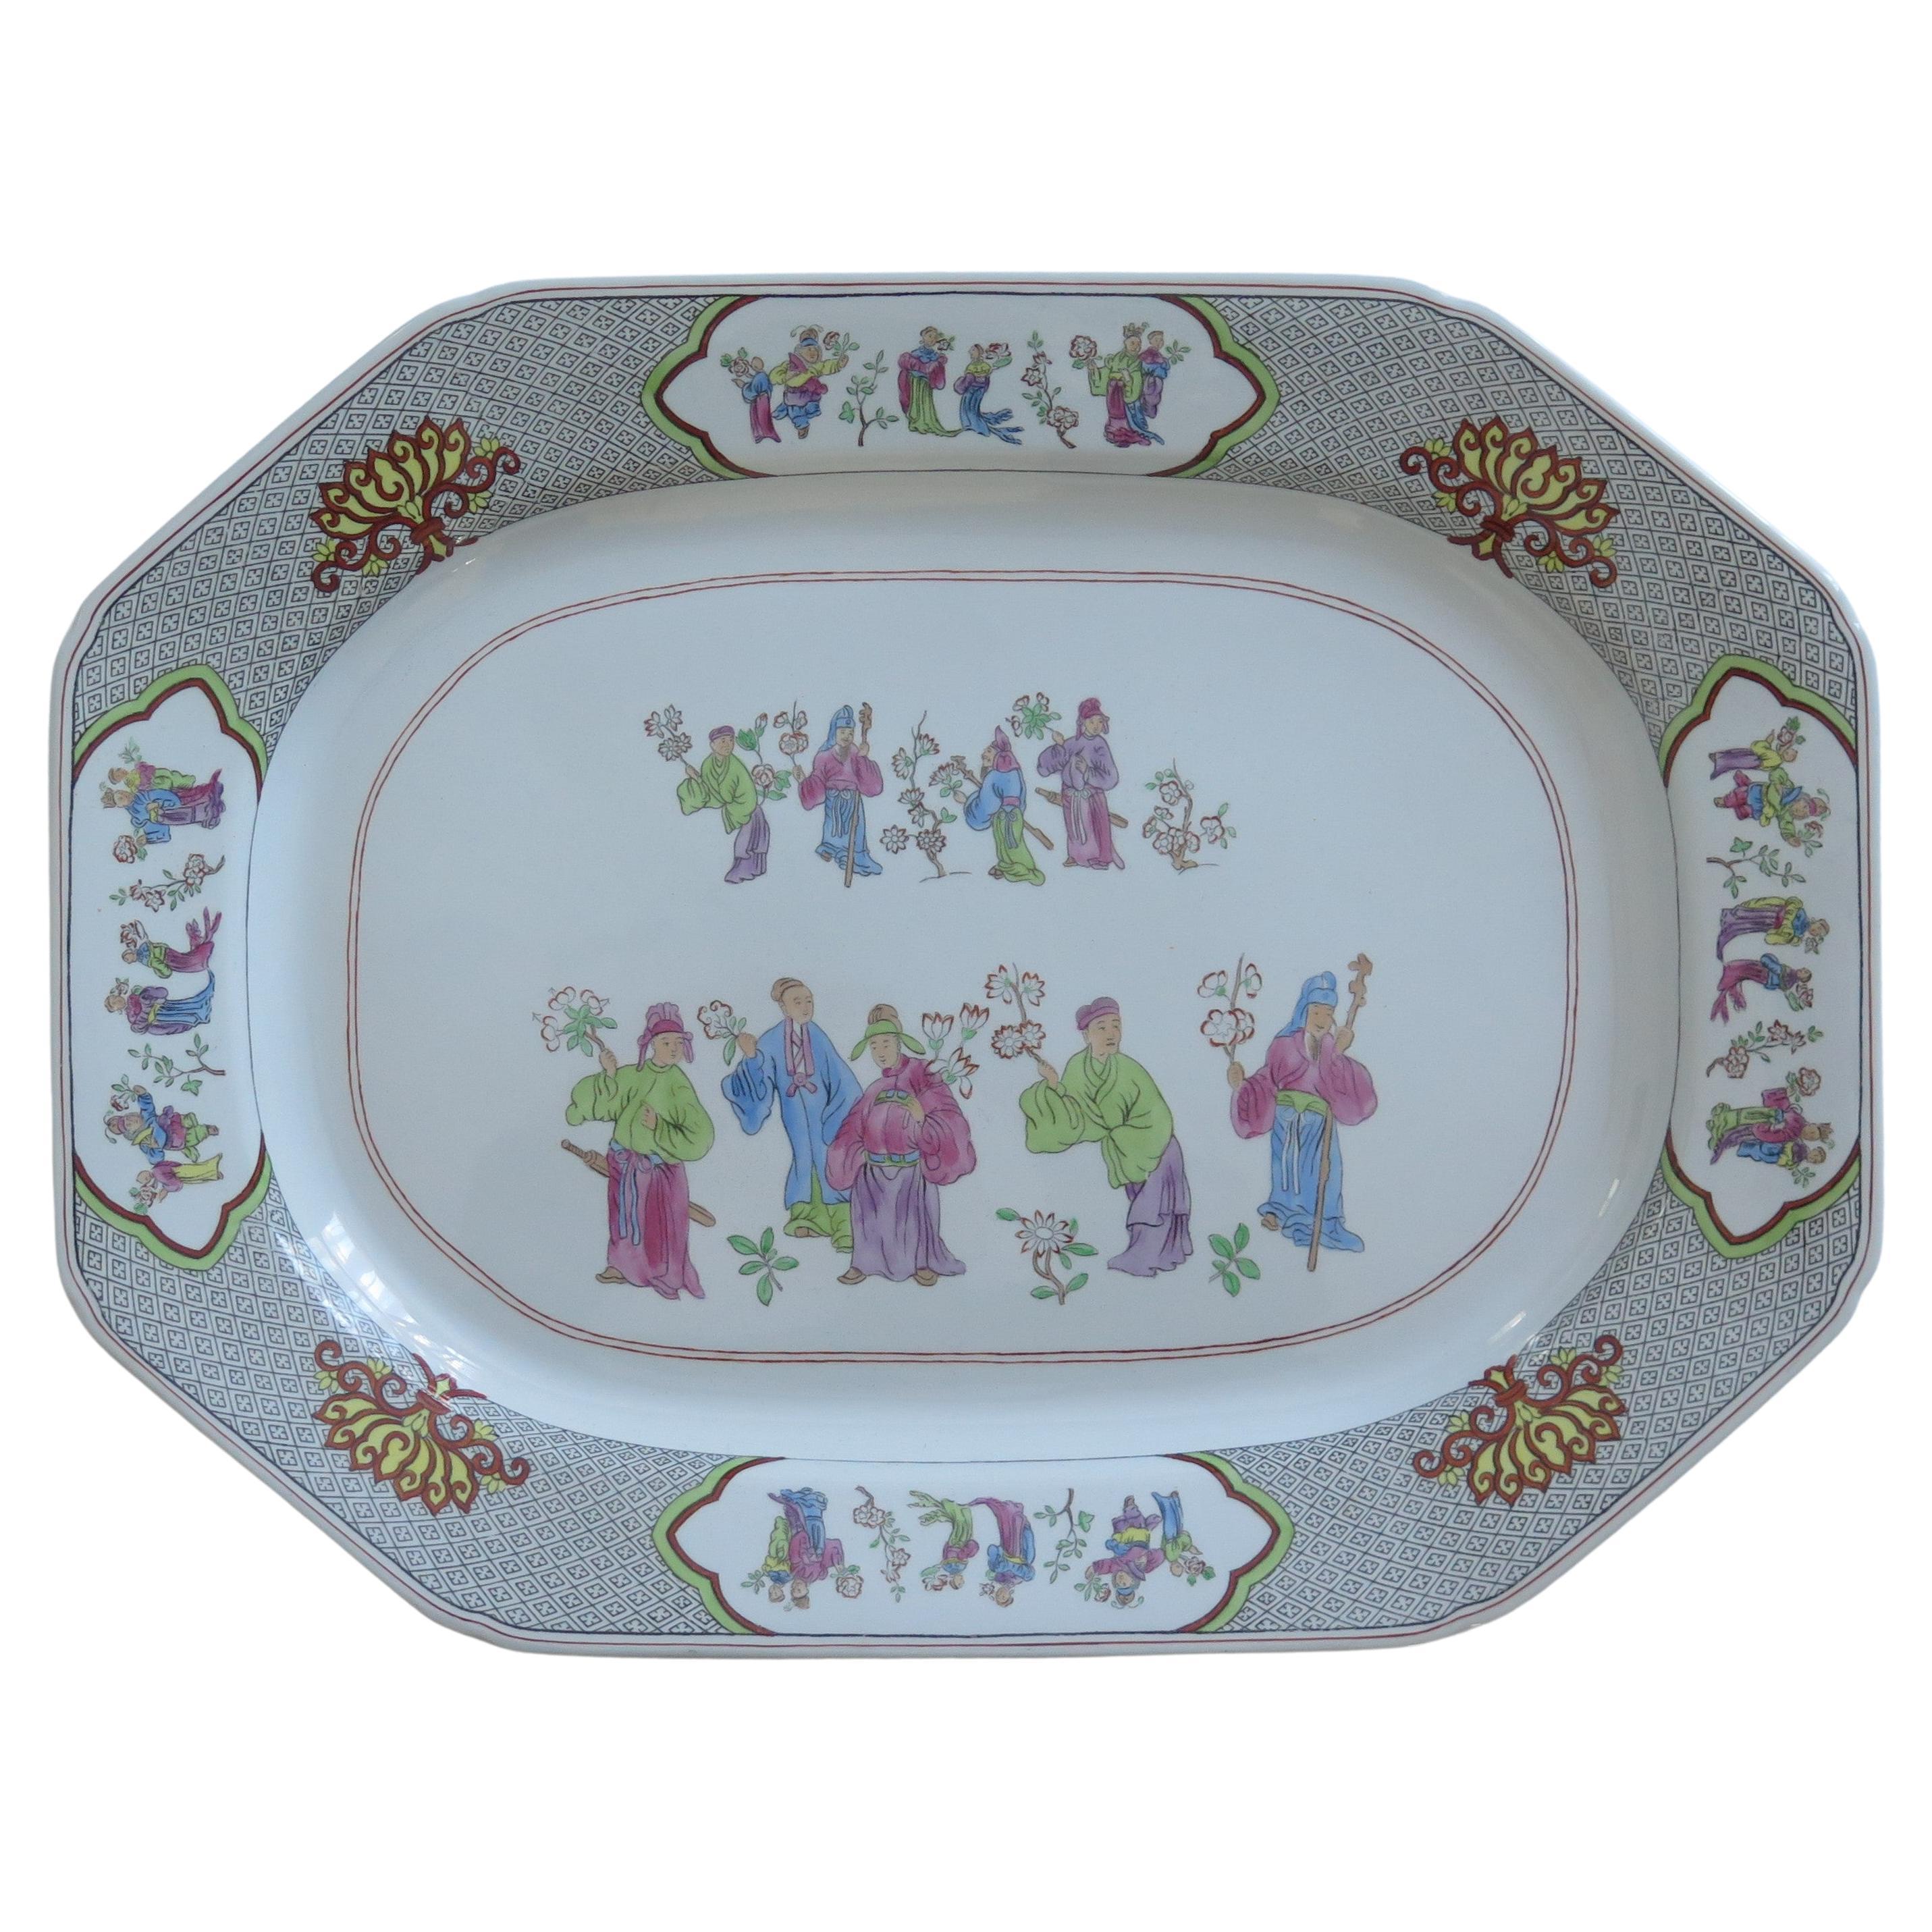 Copeland-Spode Large Ironstone Platter in Chinese Figures pattern, Ca 1900 For Sale